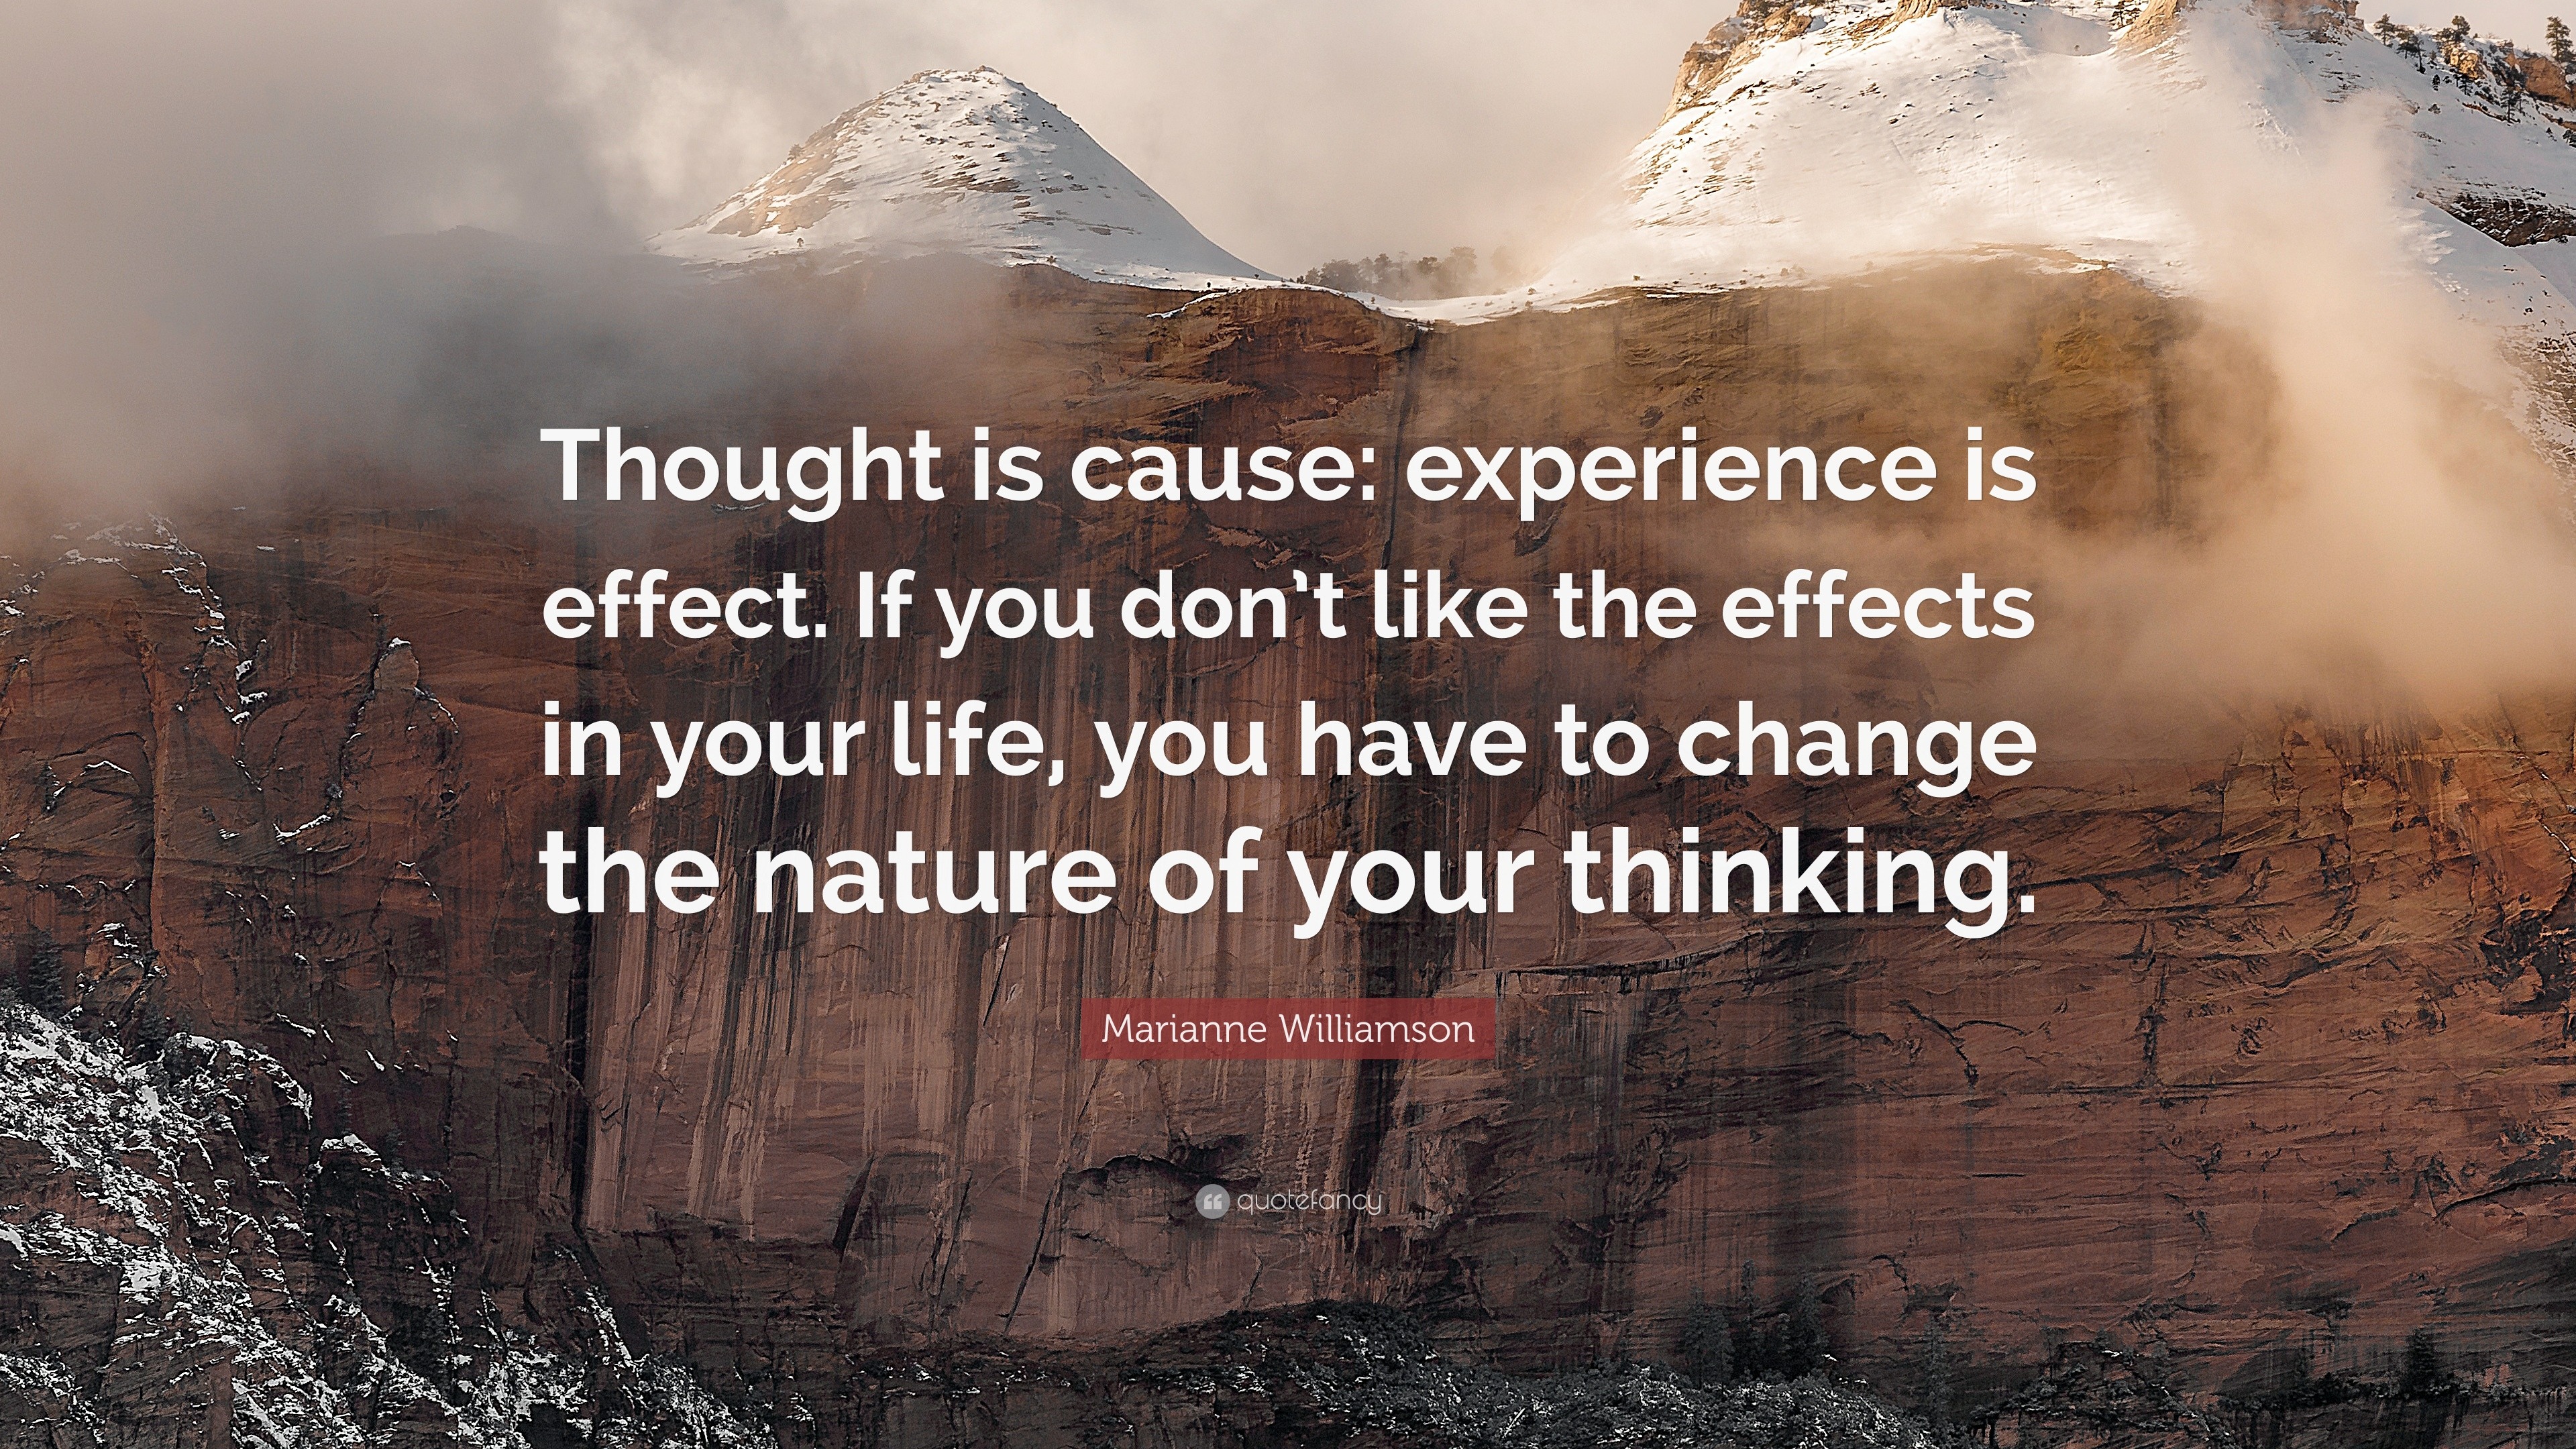 Marianne Williamson Quote: “Thought is cause: experience is effect. If ...